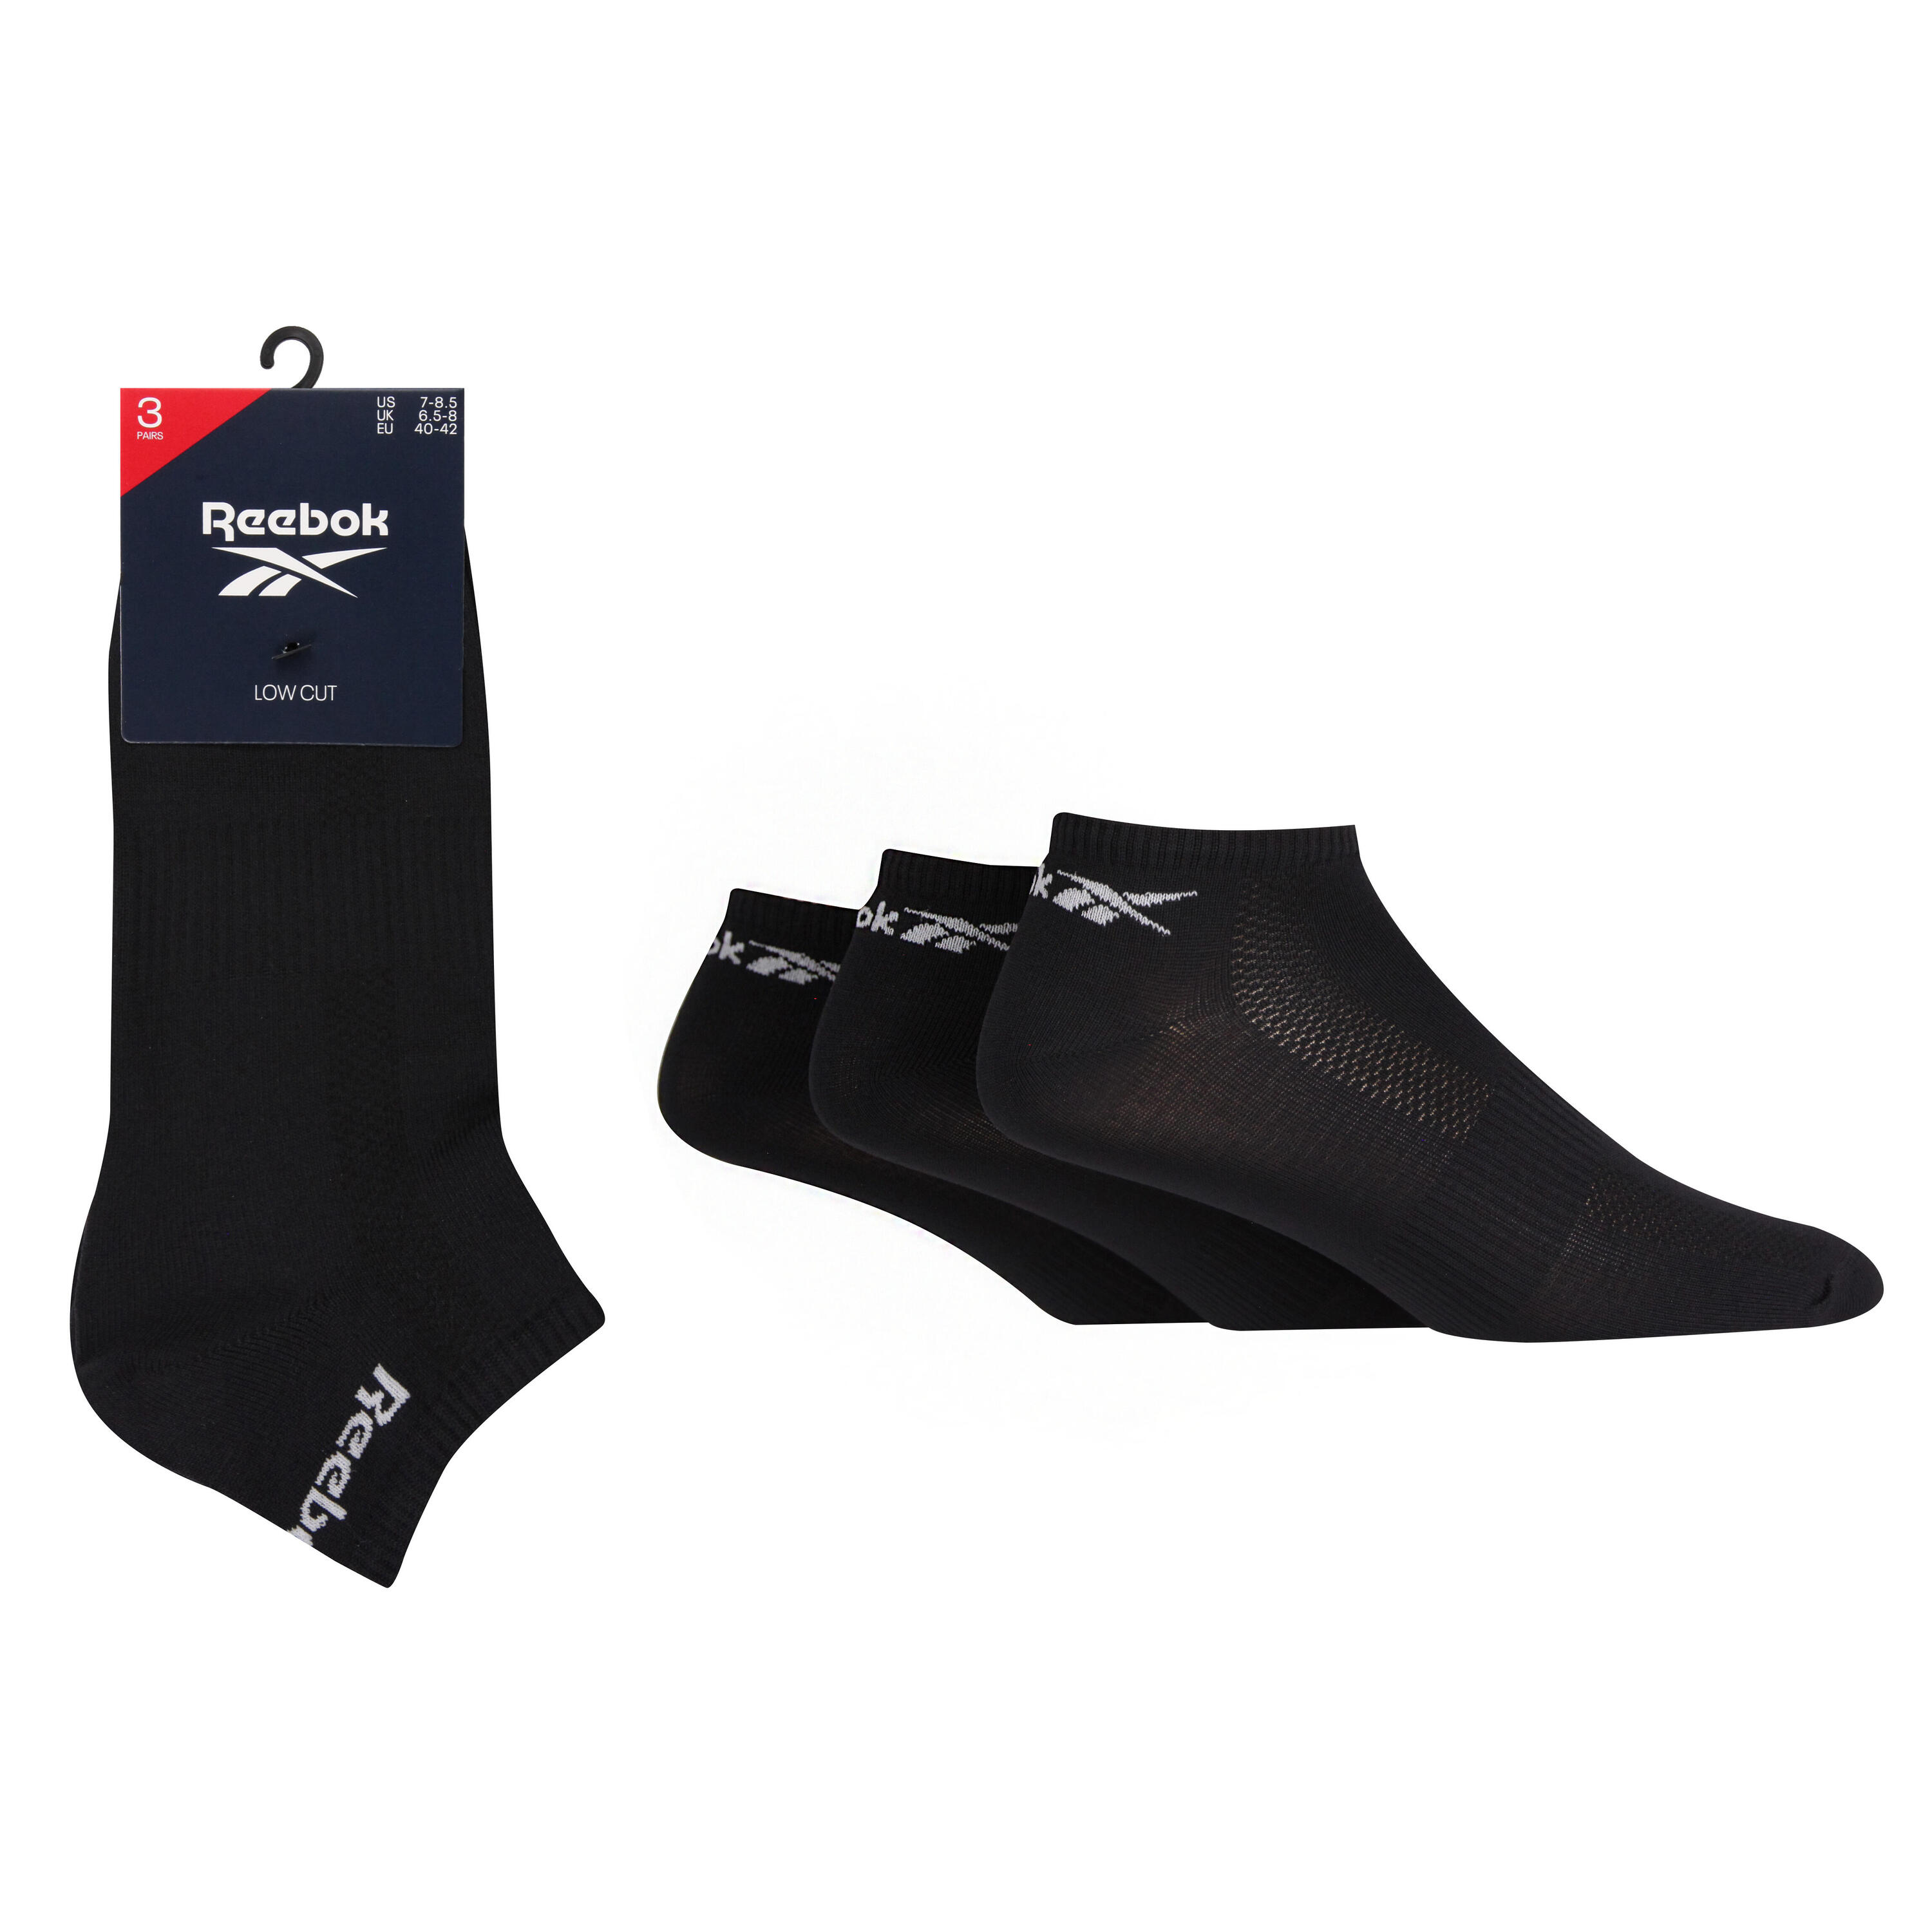 REEBOK 3 Pair Pack Low Cut Trainer Sports Socks With Arch Support And Seamless Toes